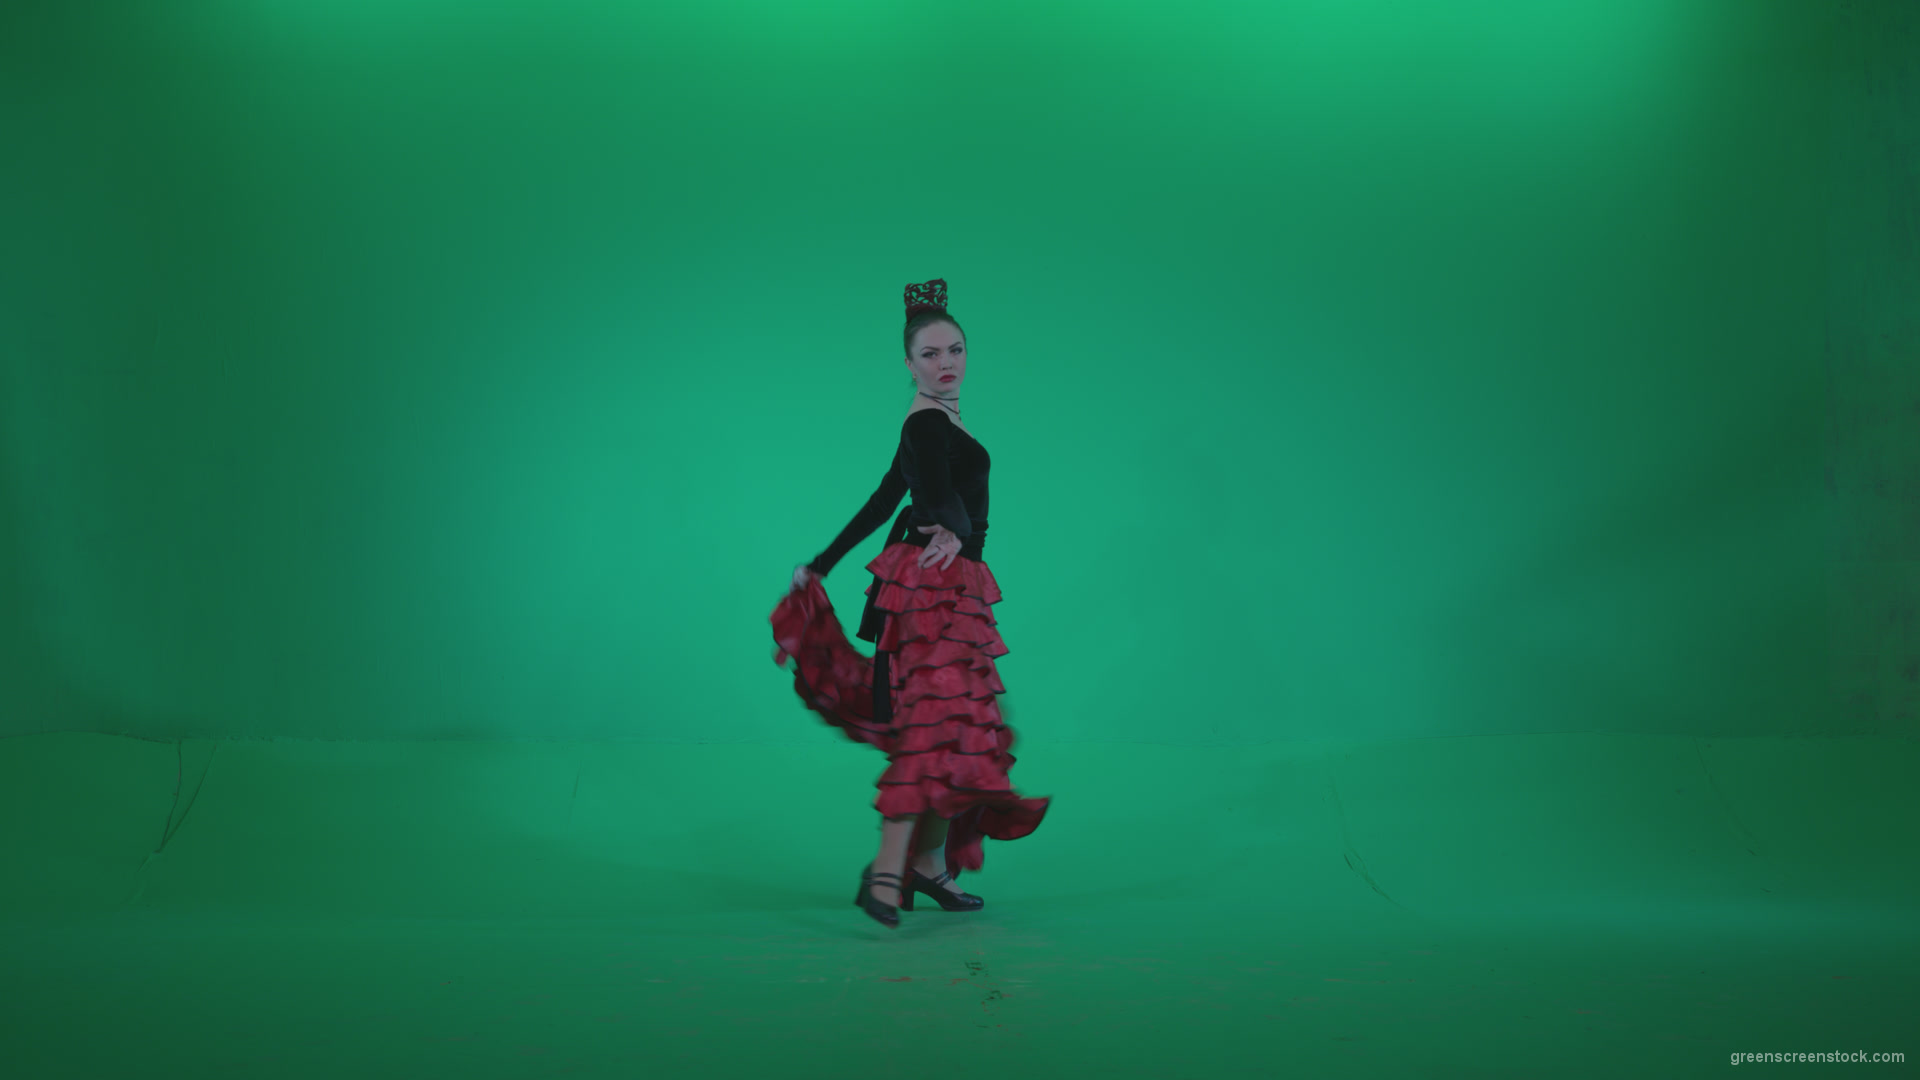 Flamenco-Red-and-Black-Dress-rb6-Green-Screen-Video-Footage_002 Green Screen Stock